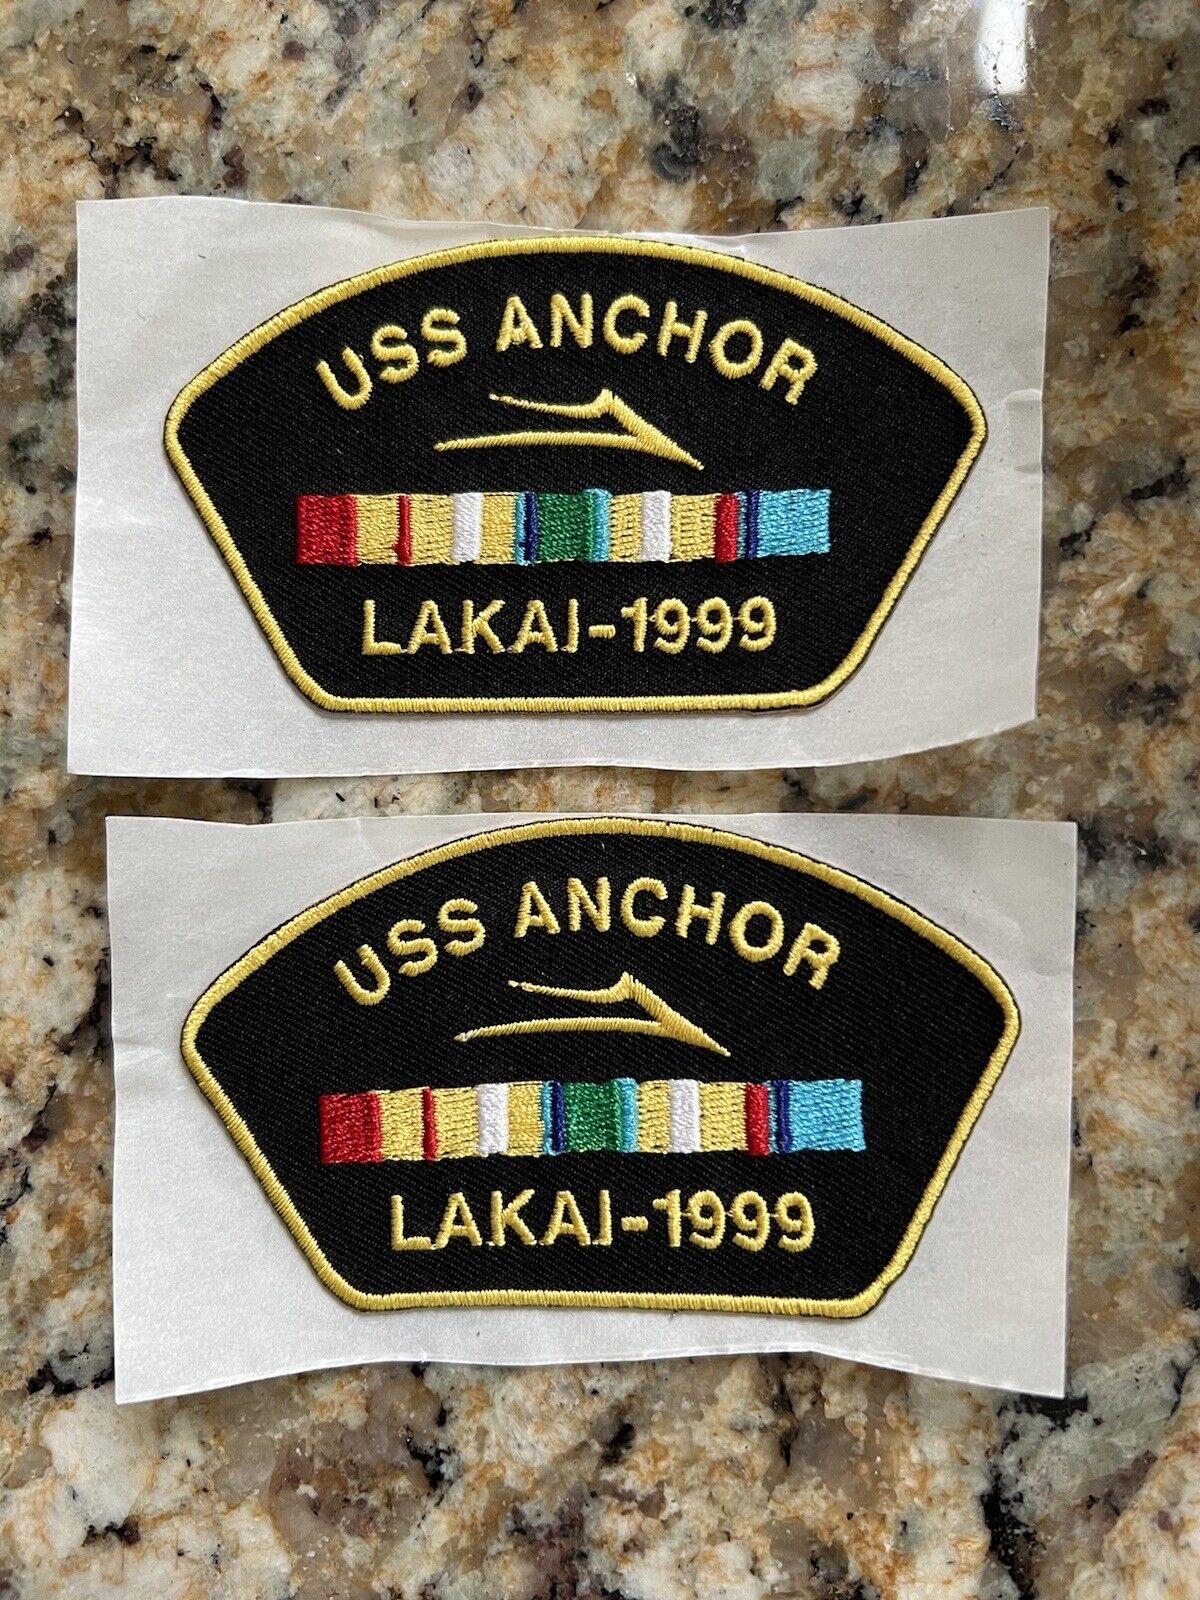 US Navy USS Anchor Lakai 1999 Adhesive/Sew On Patch New old Stock Lot of 2